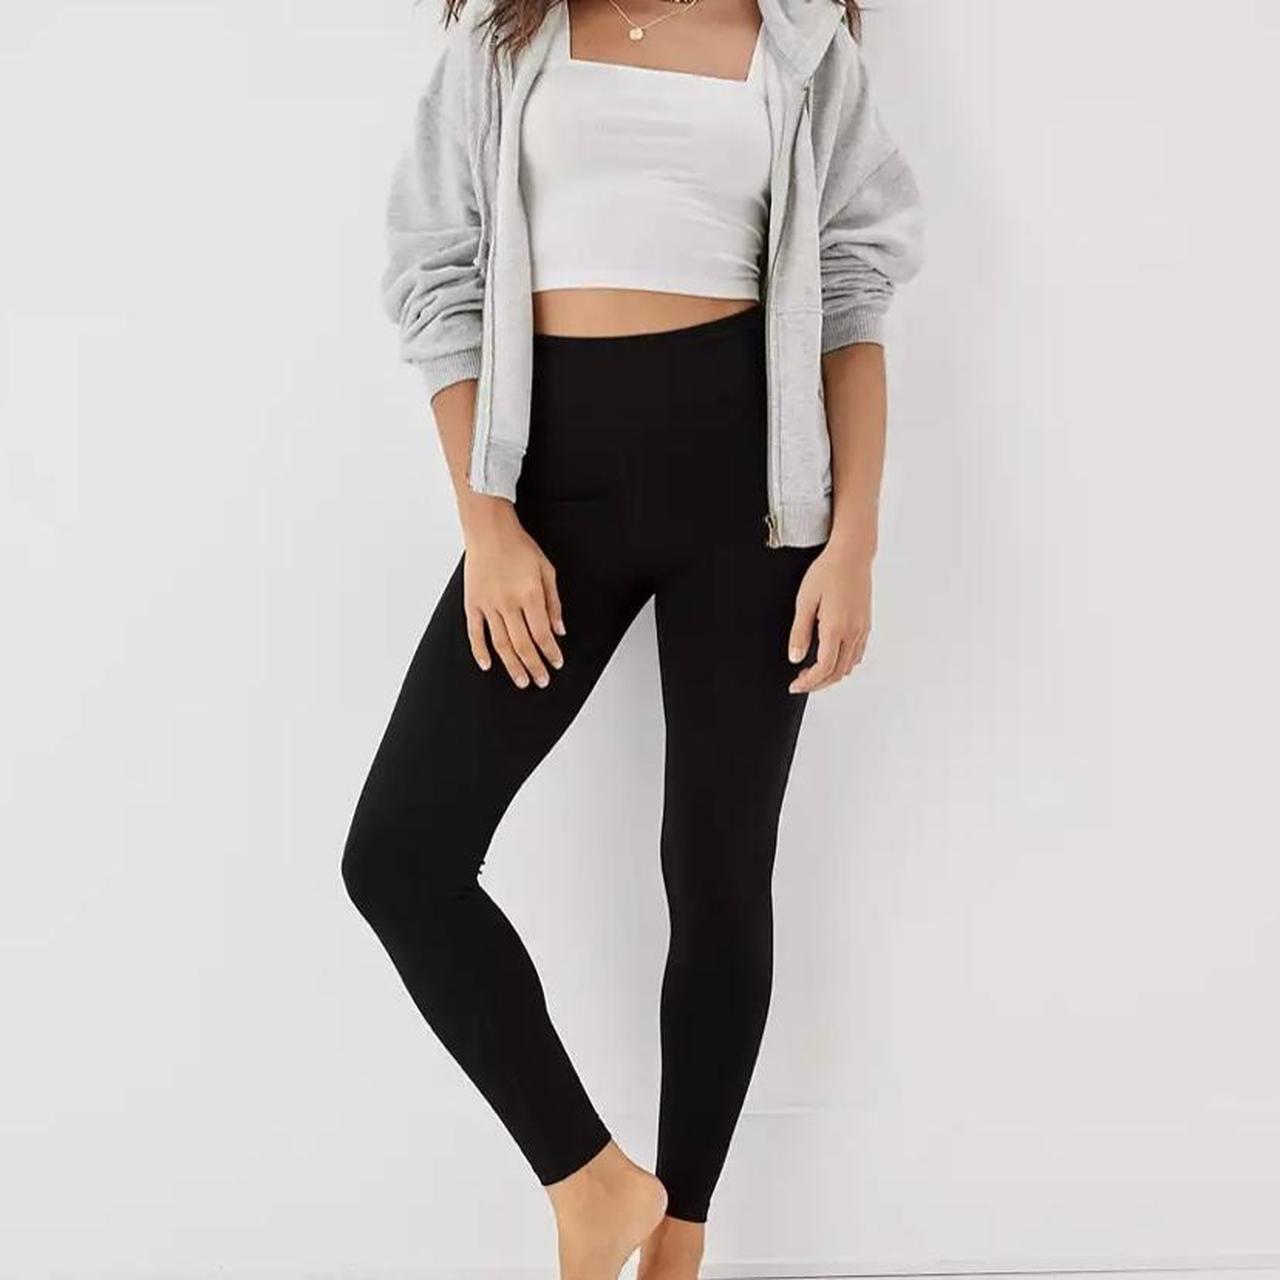 American Eagle Outfitters Women's Leggings (4)